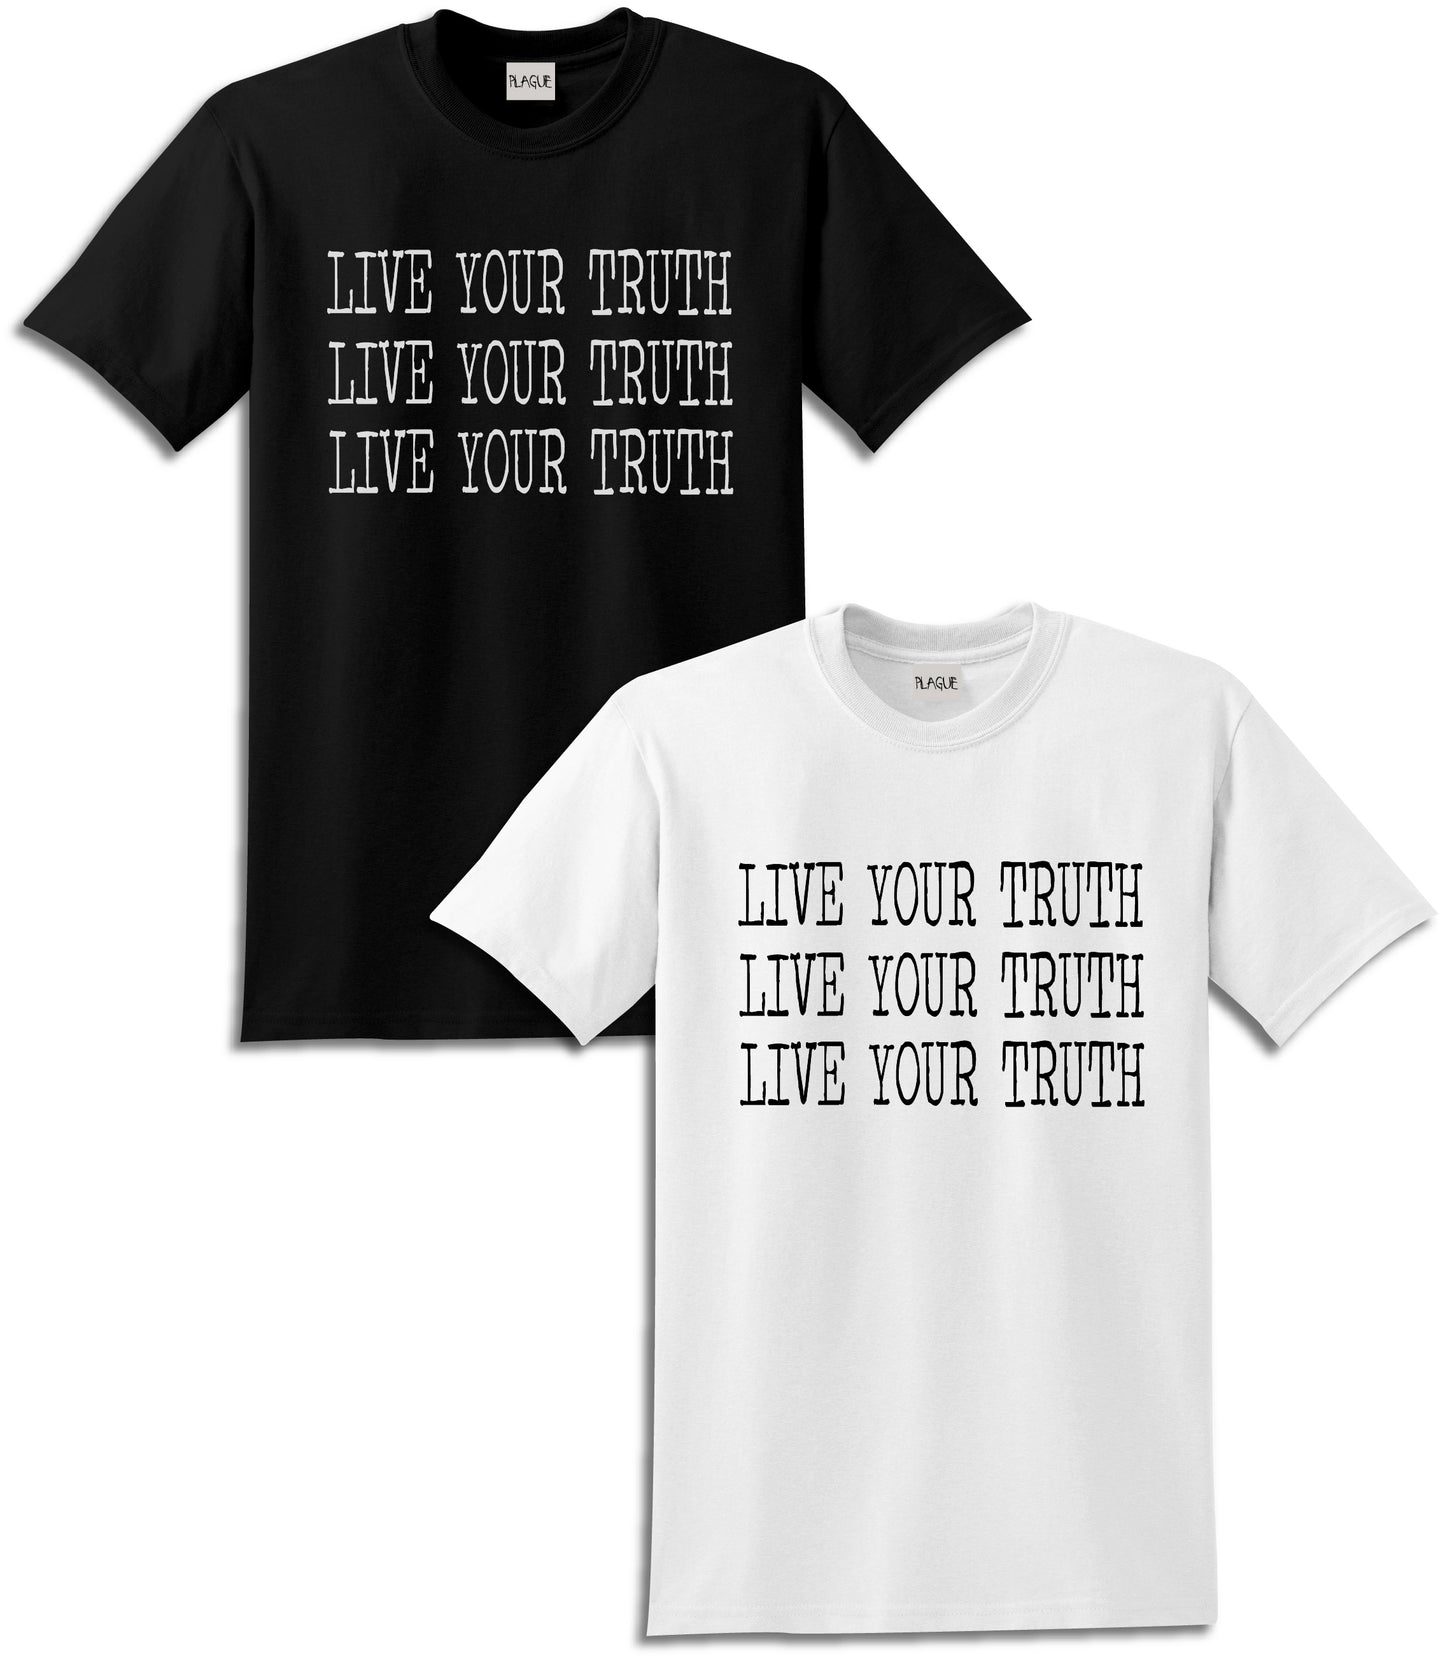 "Live your truth" in typewriter font, stacked 3 times. Available in black and white. 